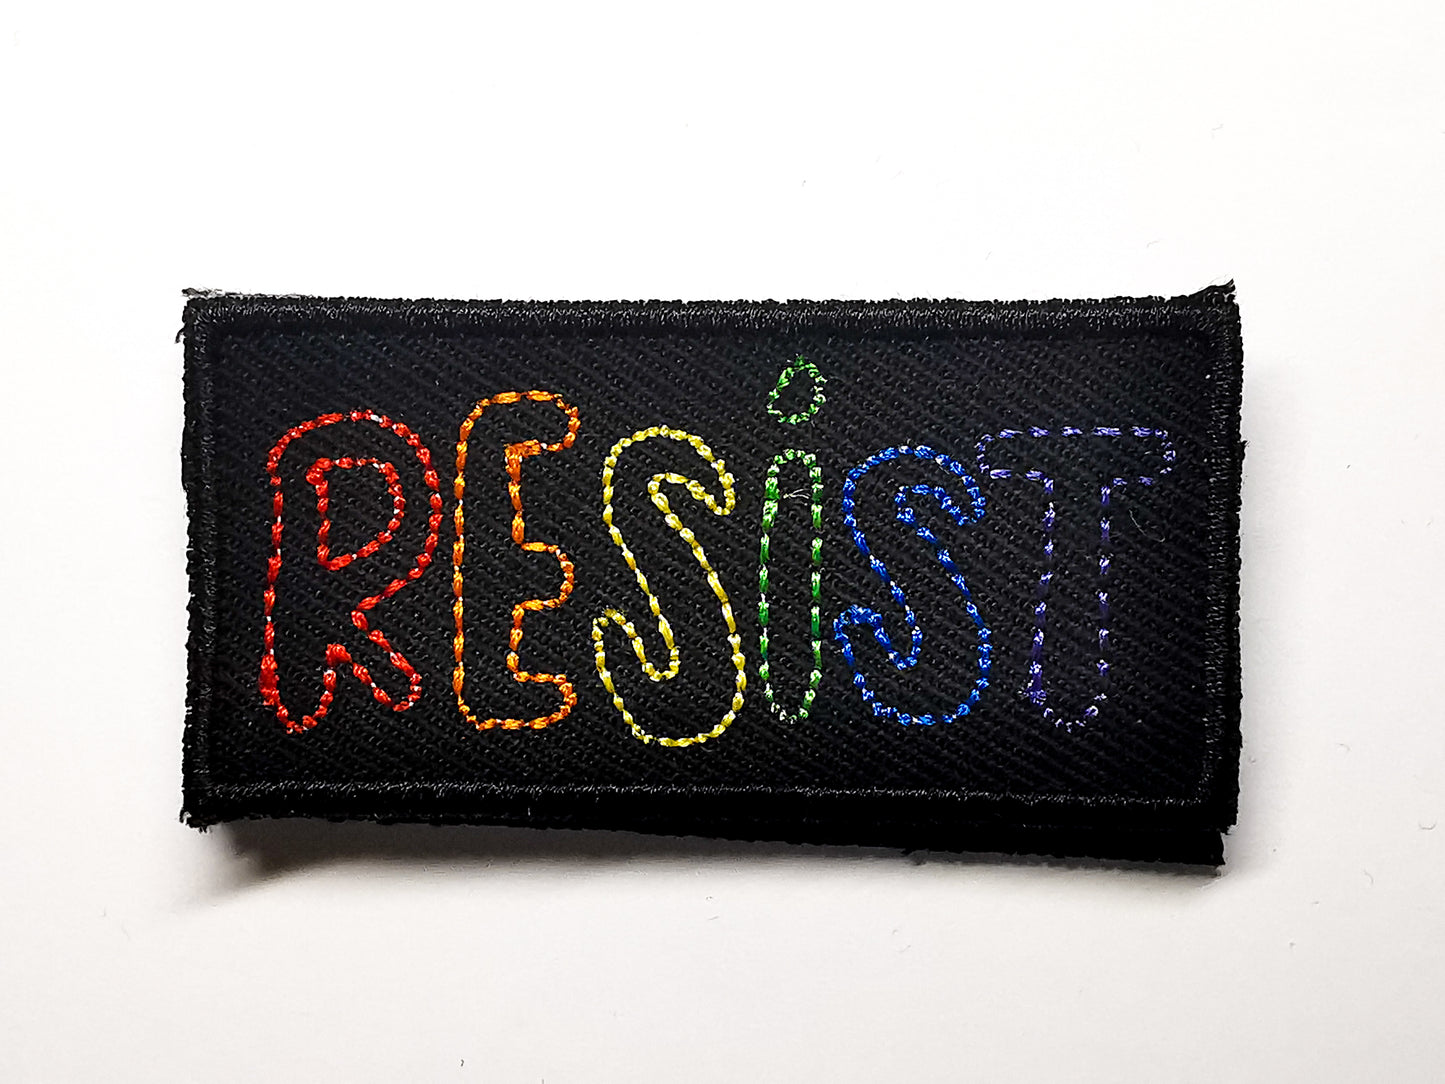 Resist Outline Anarchist Politics Feminist Embroidered Patch